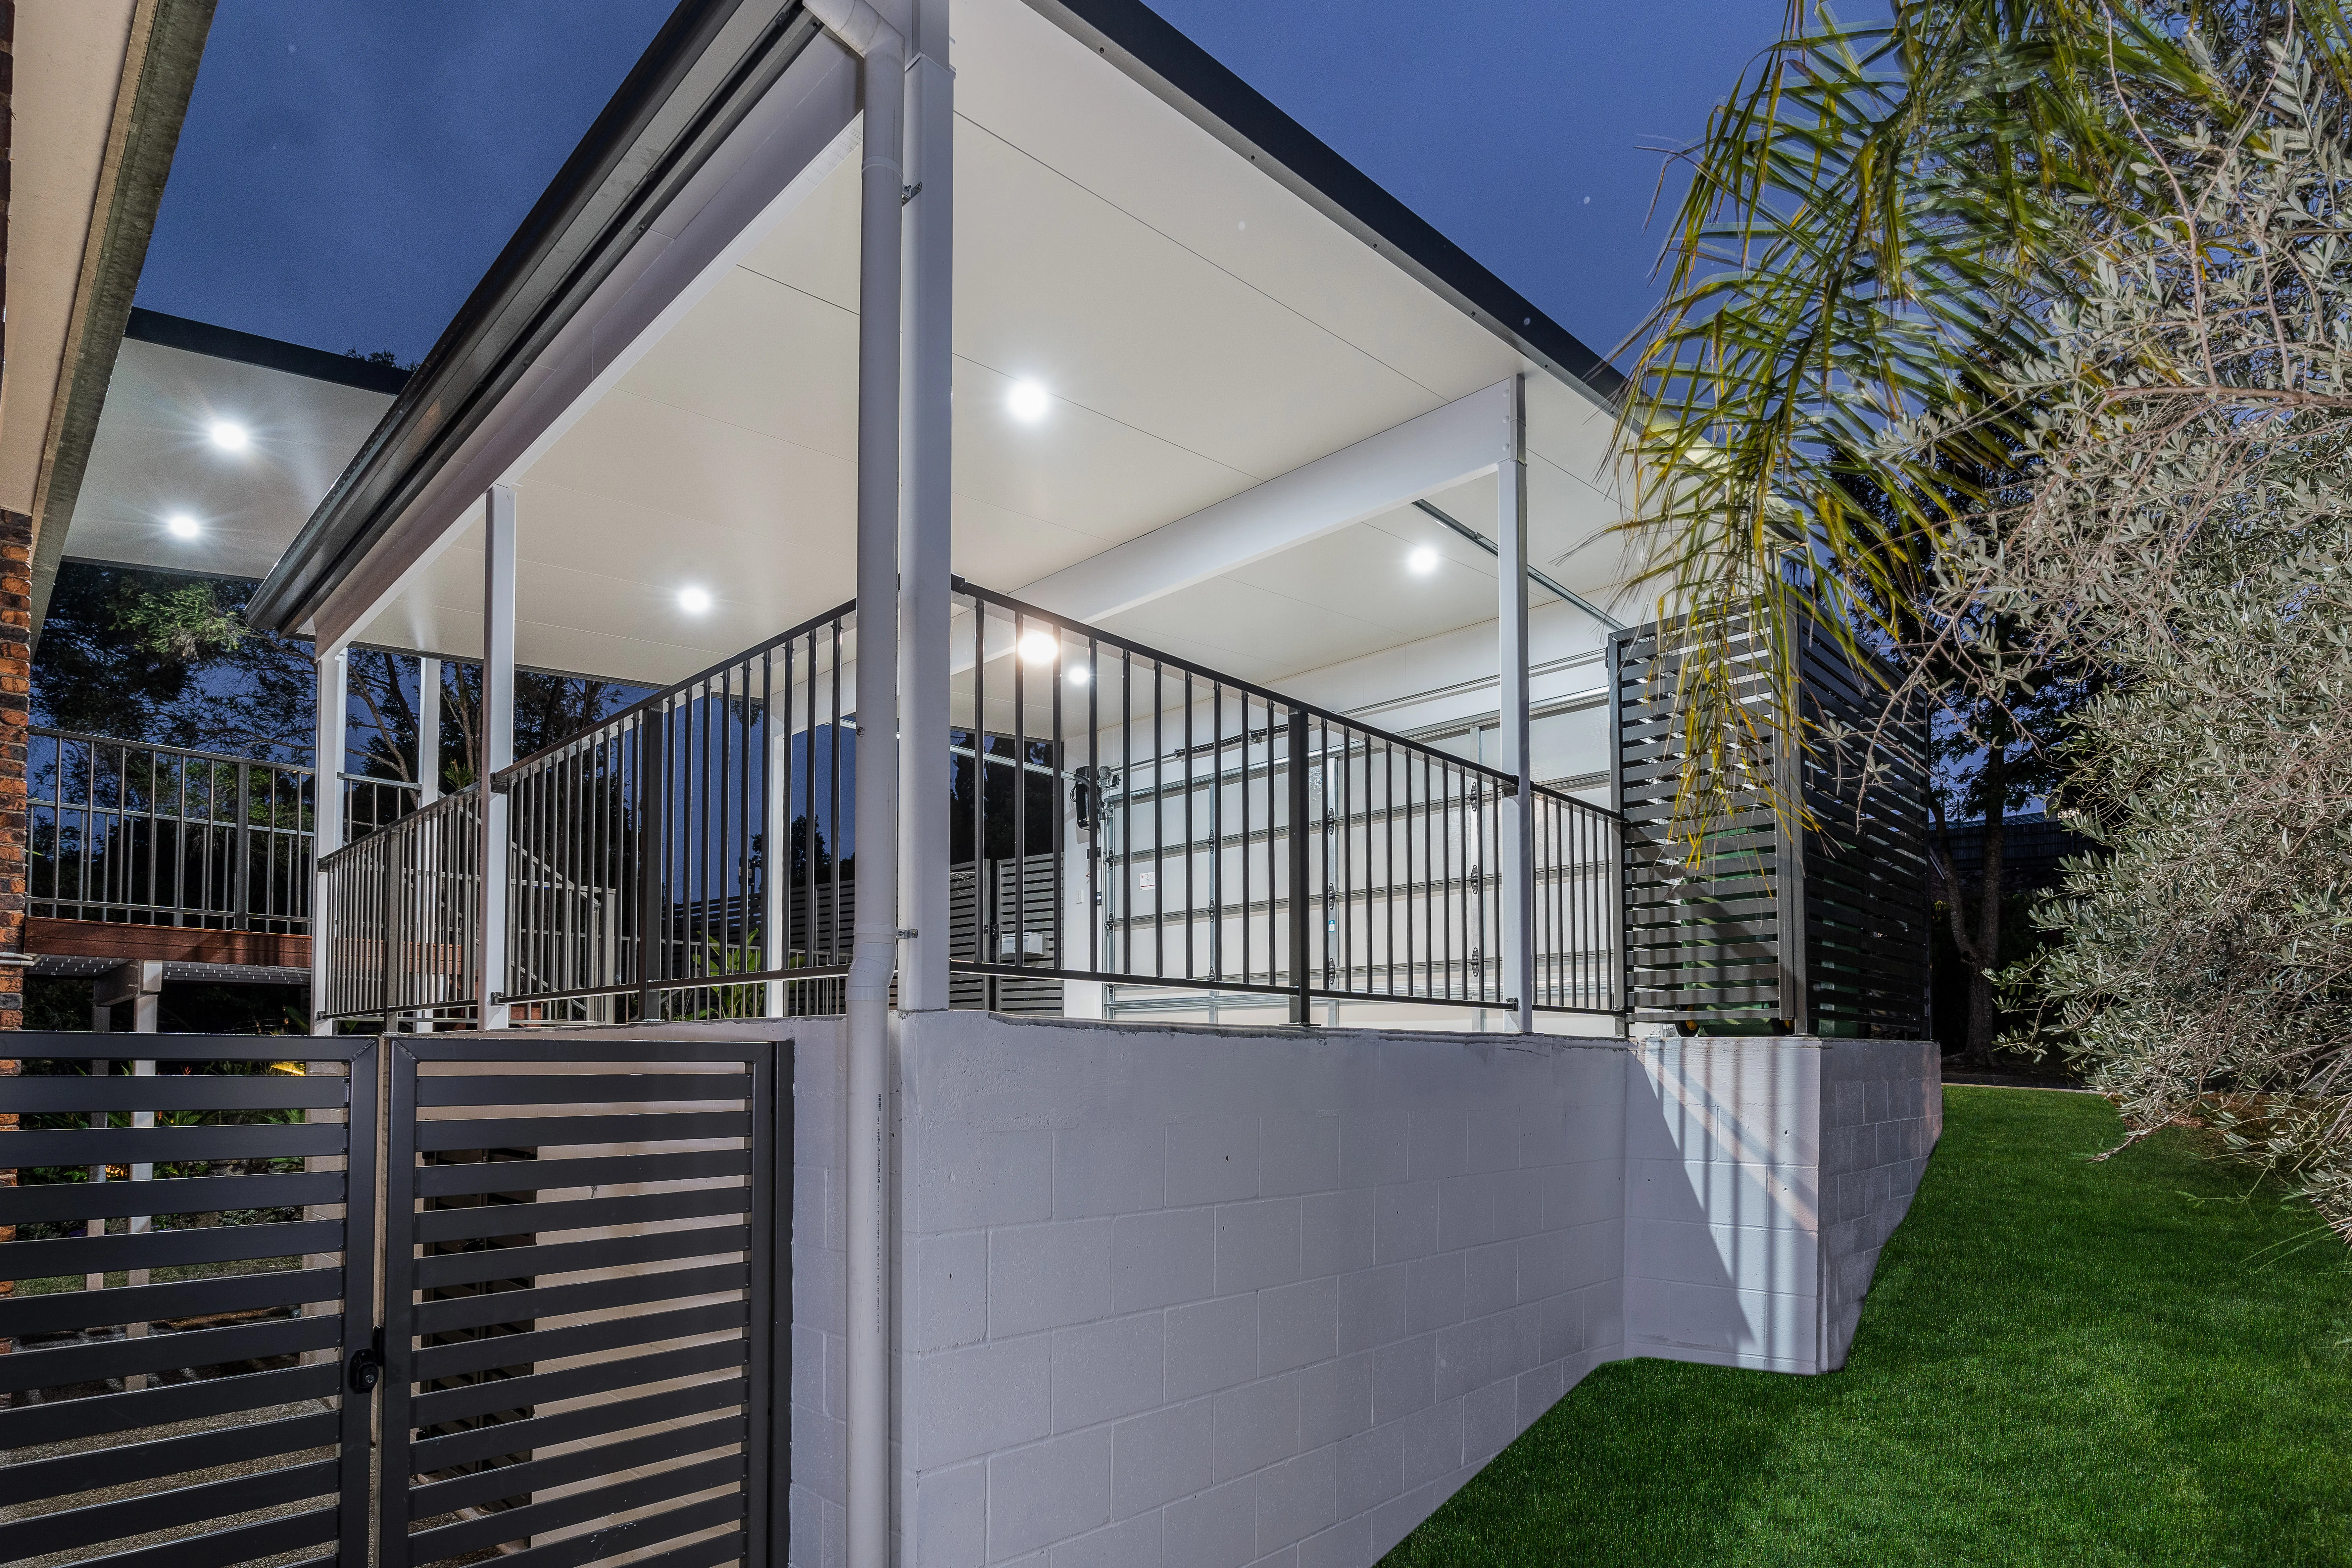 Carport with garage door and balustrade with powder coated gate